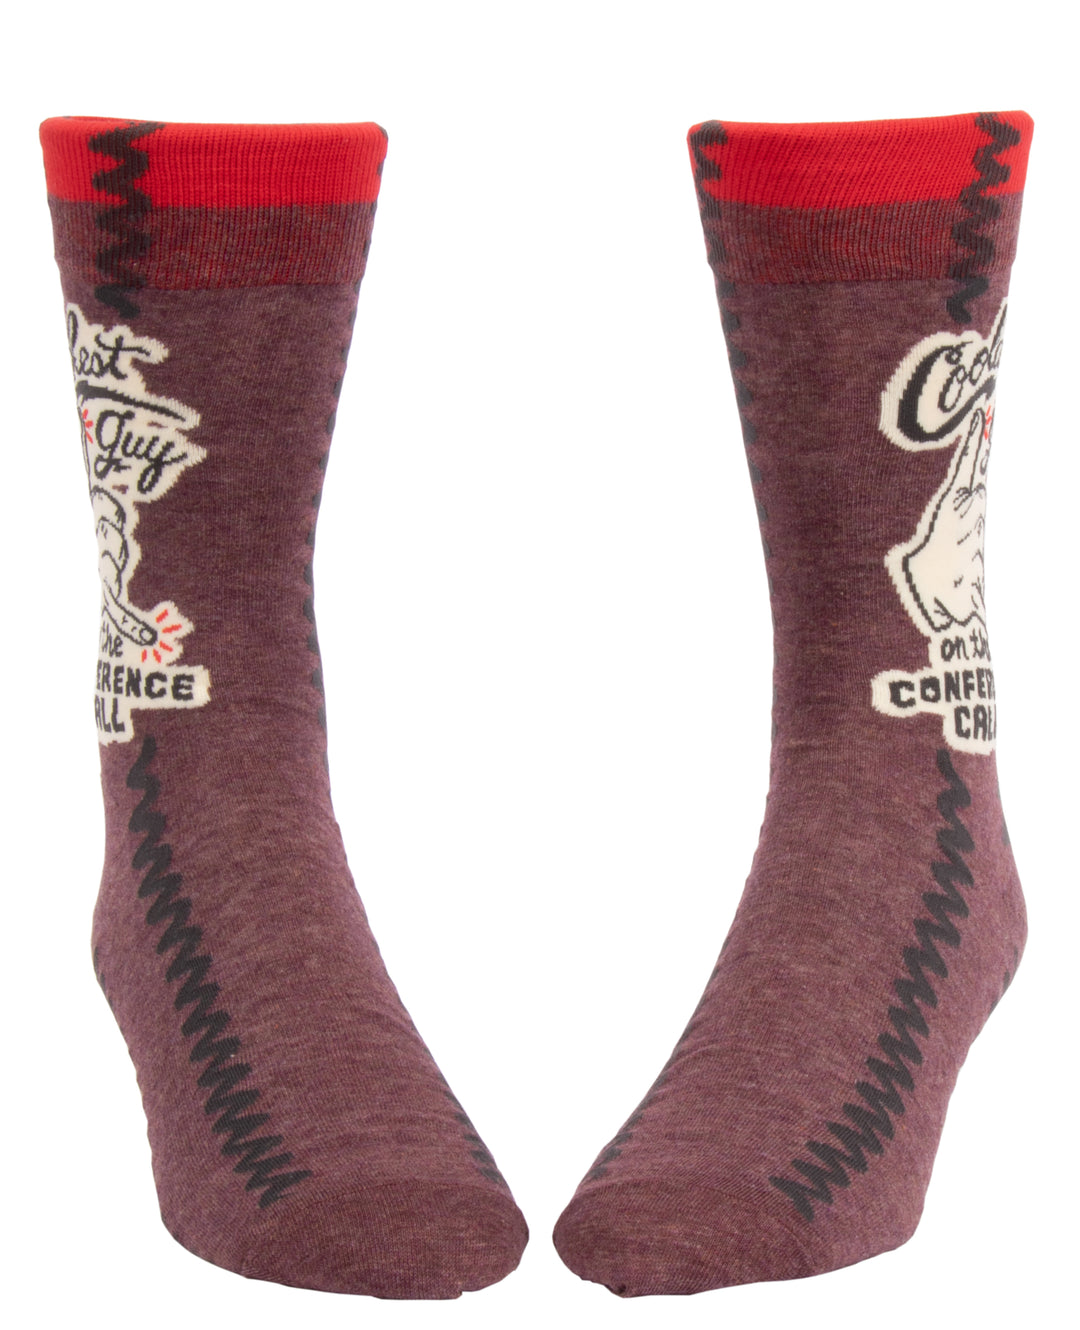 BlueQ - Men's Socks - Coolest Guy on the Conference Call